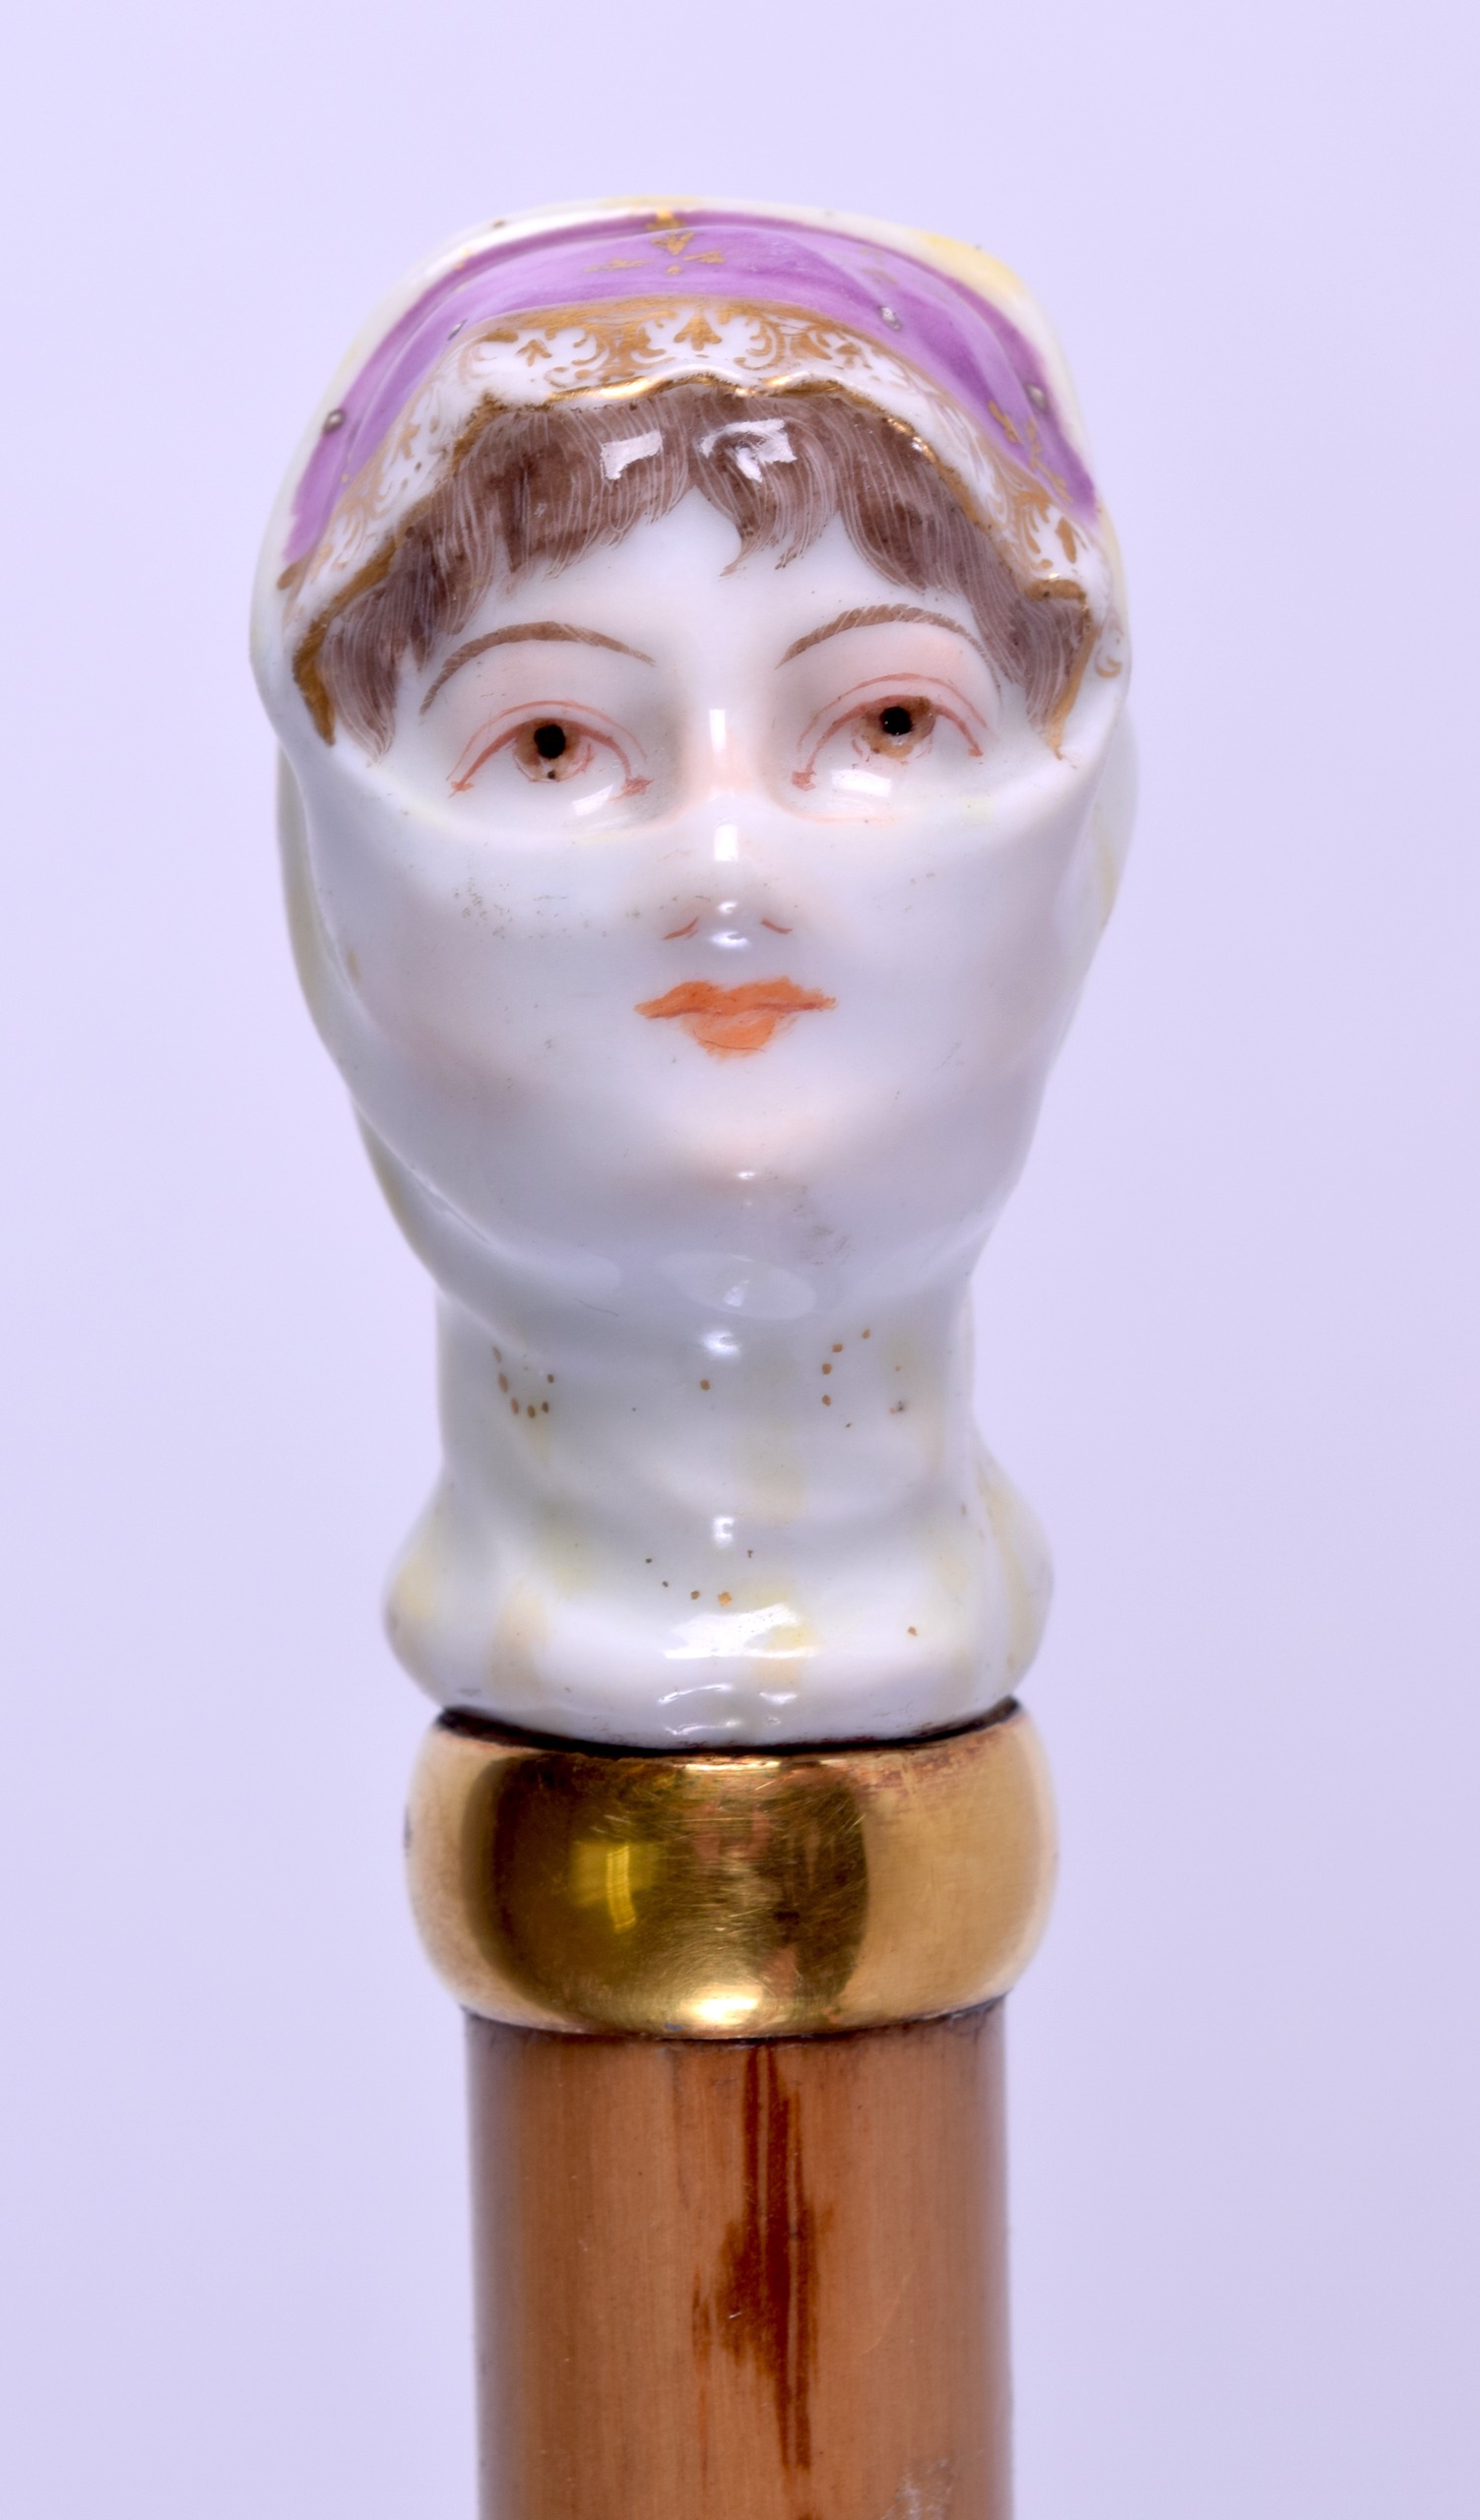 AN UNUSUAL 19TH CENTURY CONTINENTAL PORCELAIN 'MASKED FEMALE' PARASOL unusually formed as a gypsy